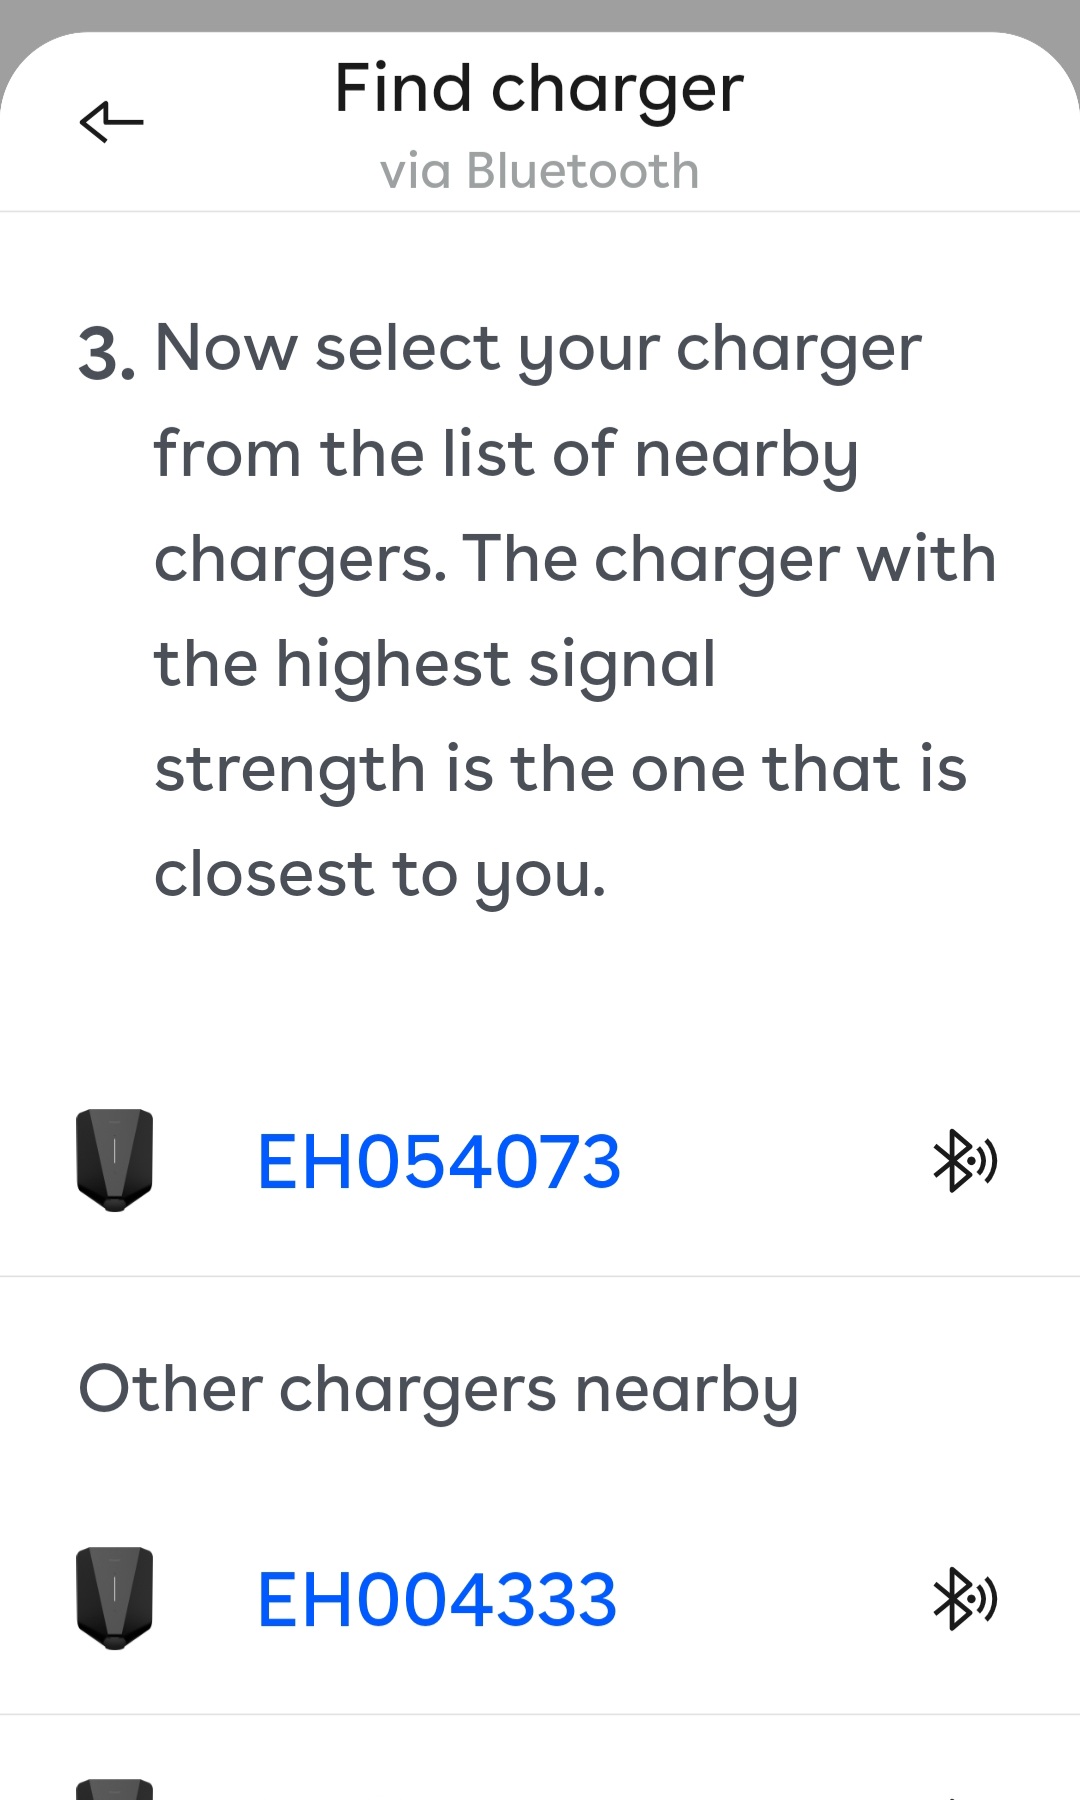 A screenshot of the Easee app showing all local chargers, by serial number, with bluetooth turned on.